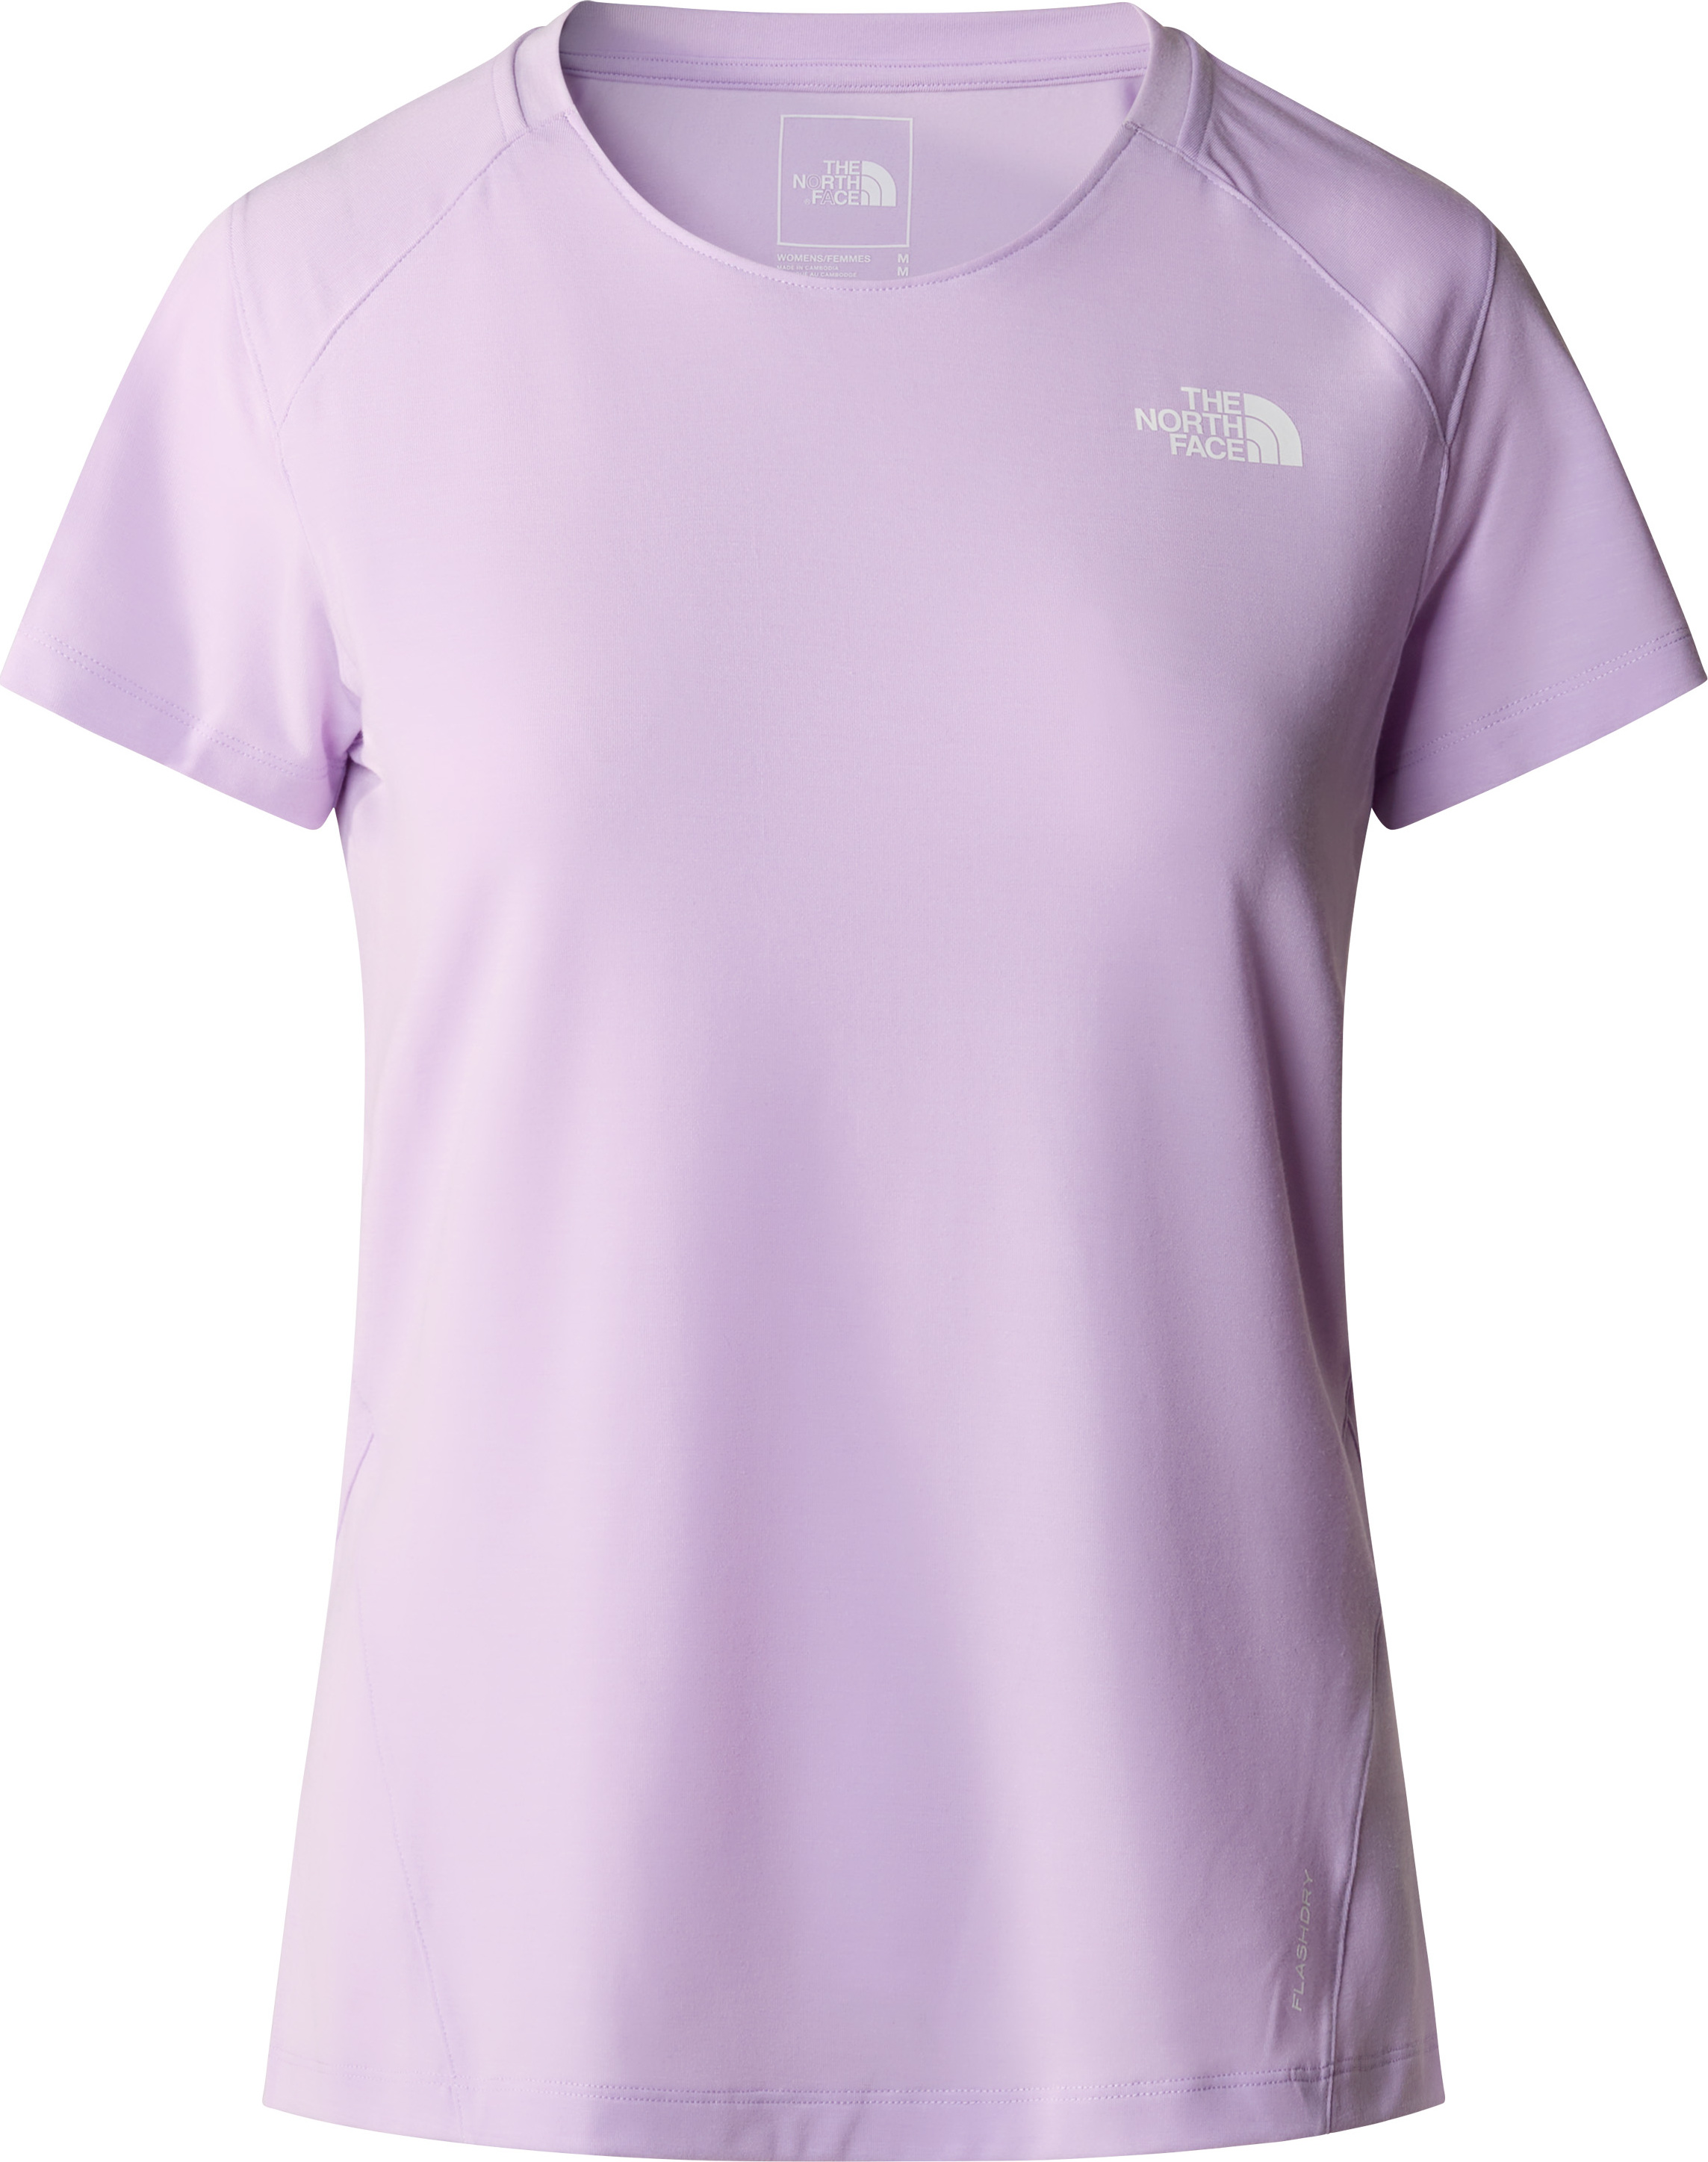 The North Face The North Face Women's Lightning Alpine T-Shirt Lite Lilac M, Lite Lilac